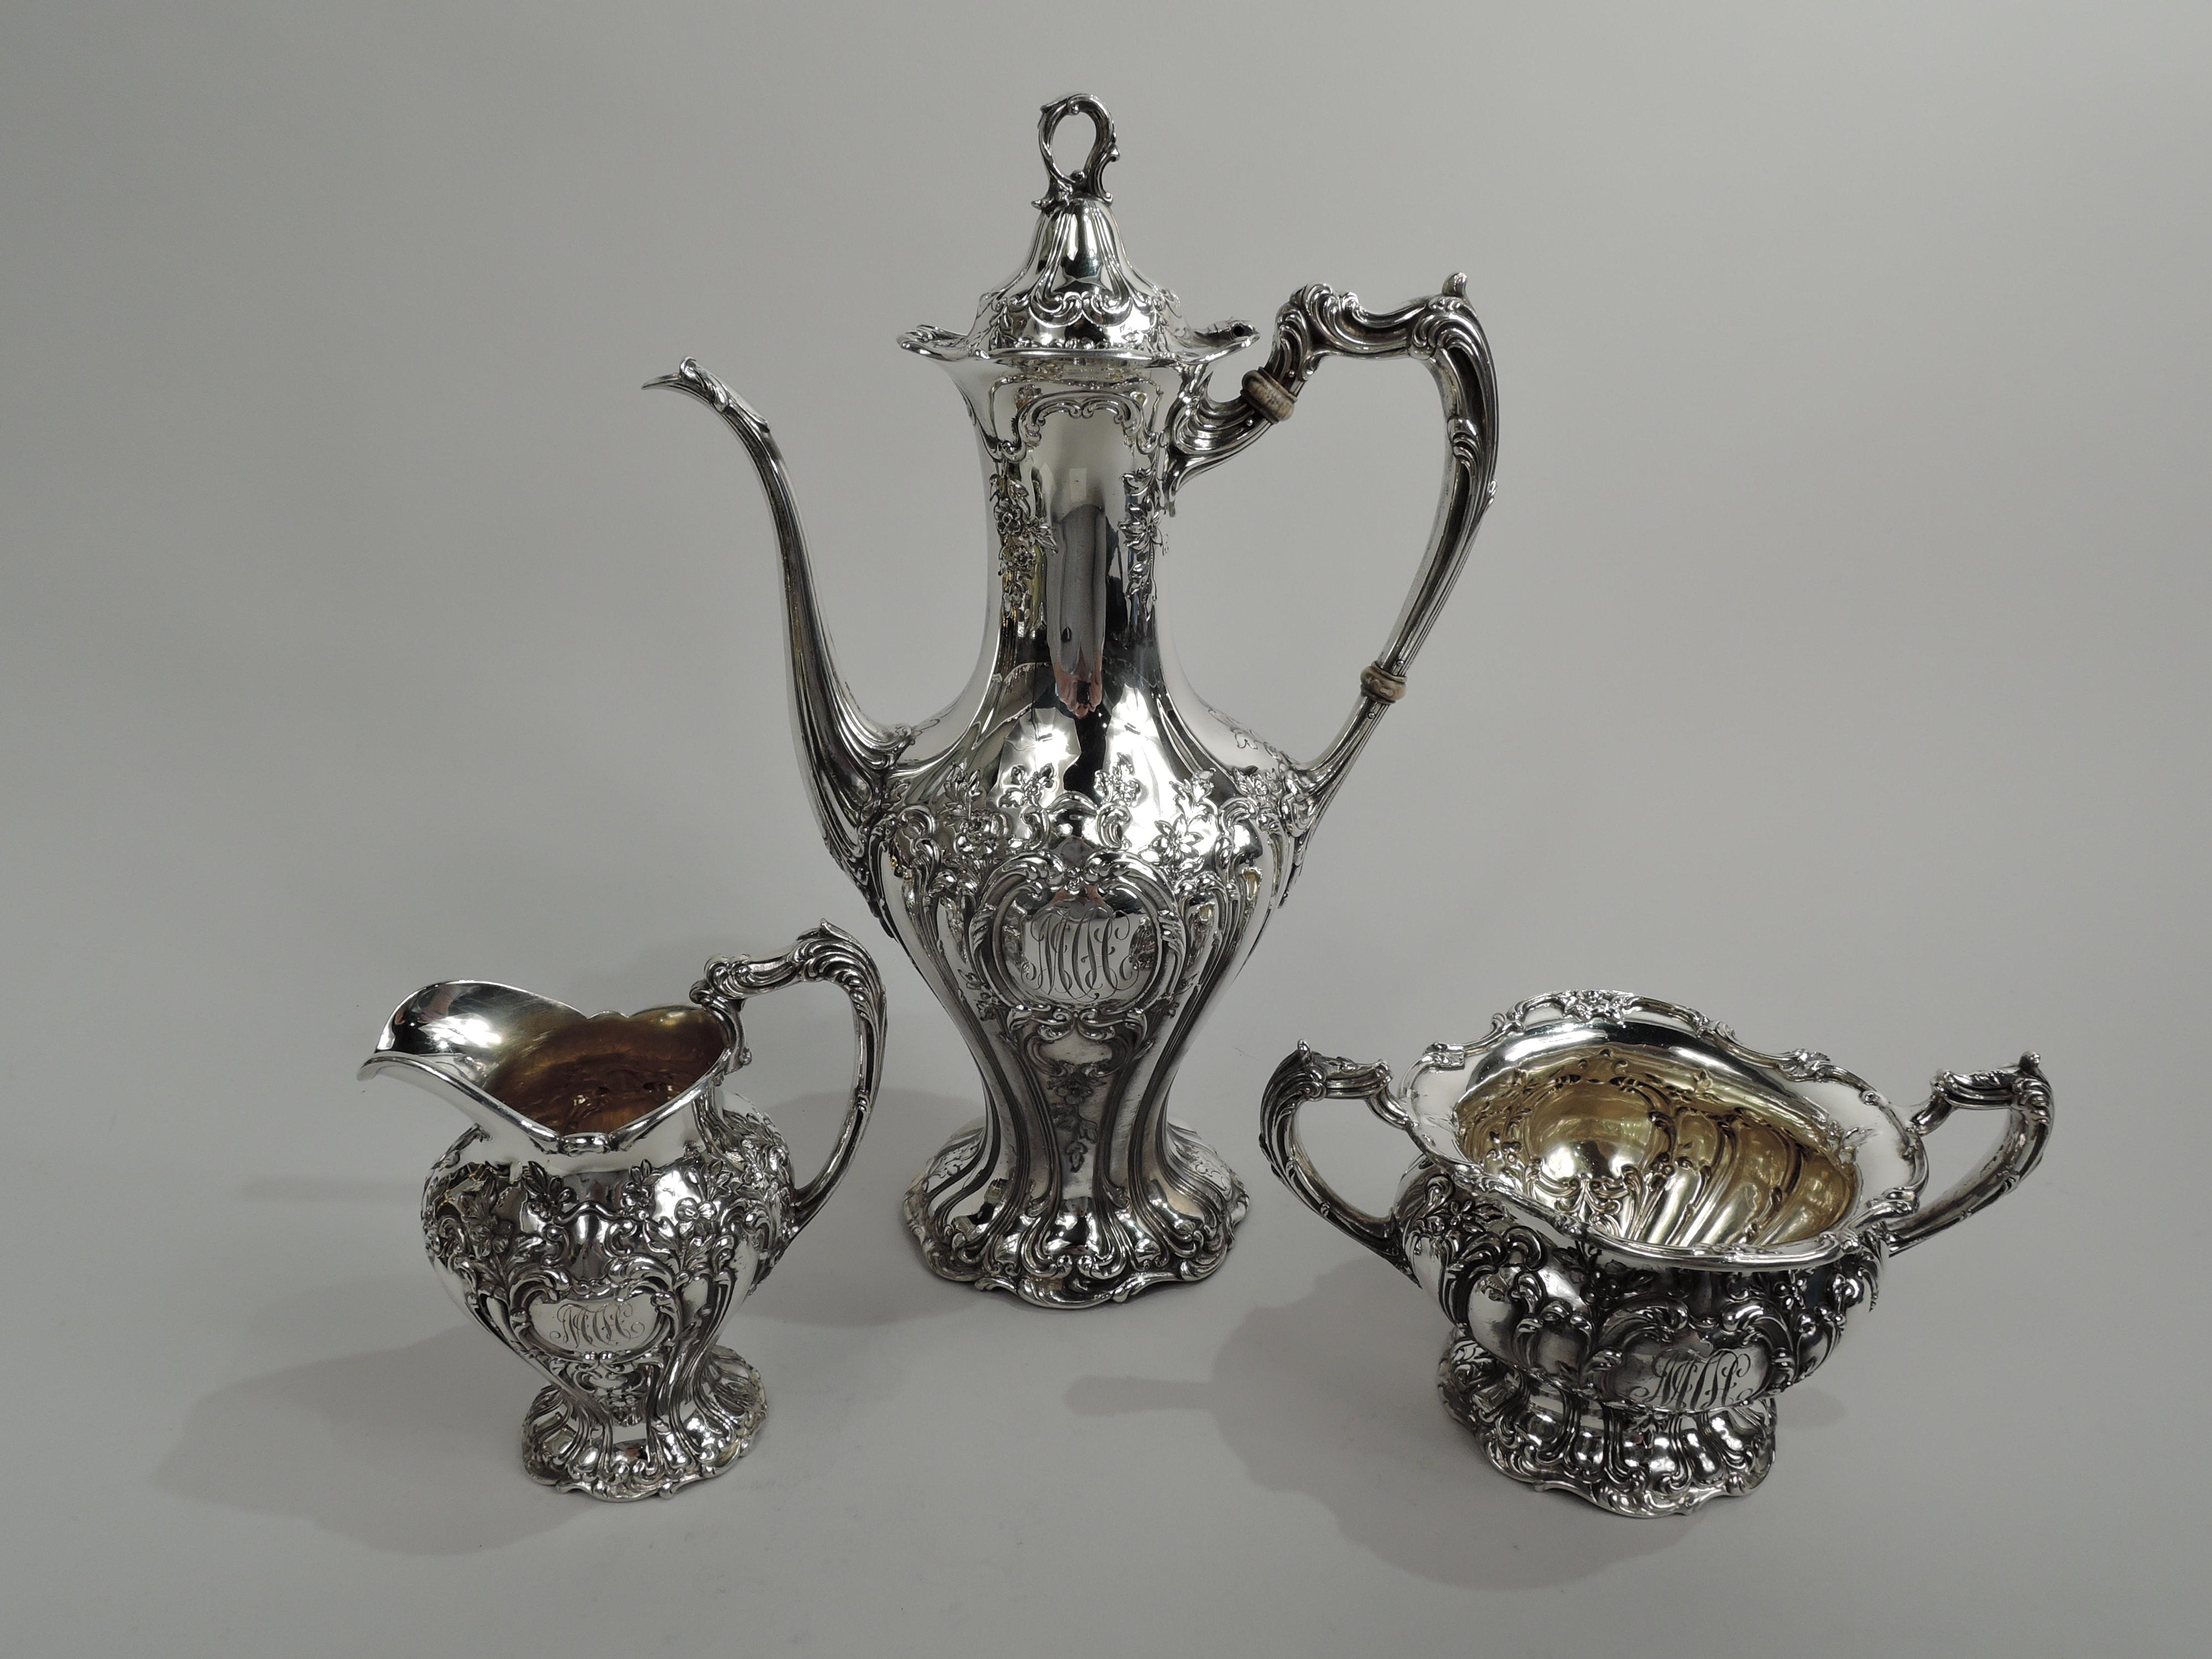 Turn-of-the-century Chantilly-Grand sterling silver 3-piece coffee set. Made by Gorham in Providence. This set comprises coffeepot, creamer, and sugar. Scrolled rims, spread and scrolled foot, and reeded and leaf-capped scroll handles. Two scrolled